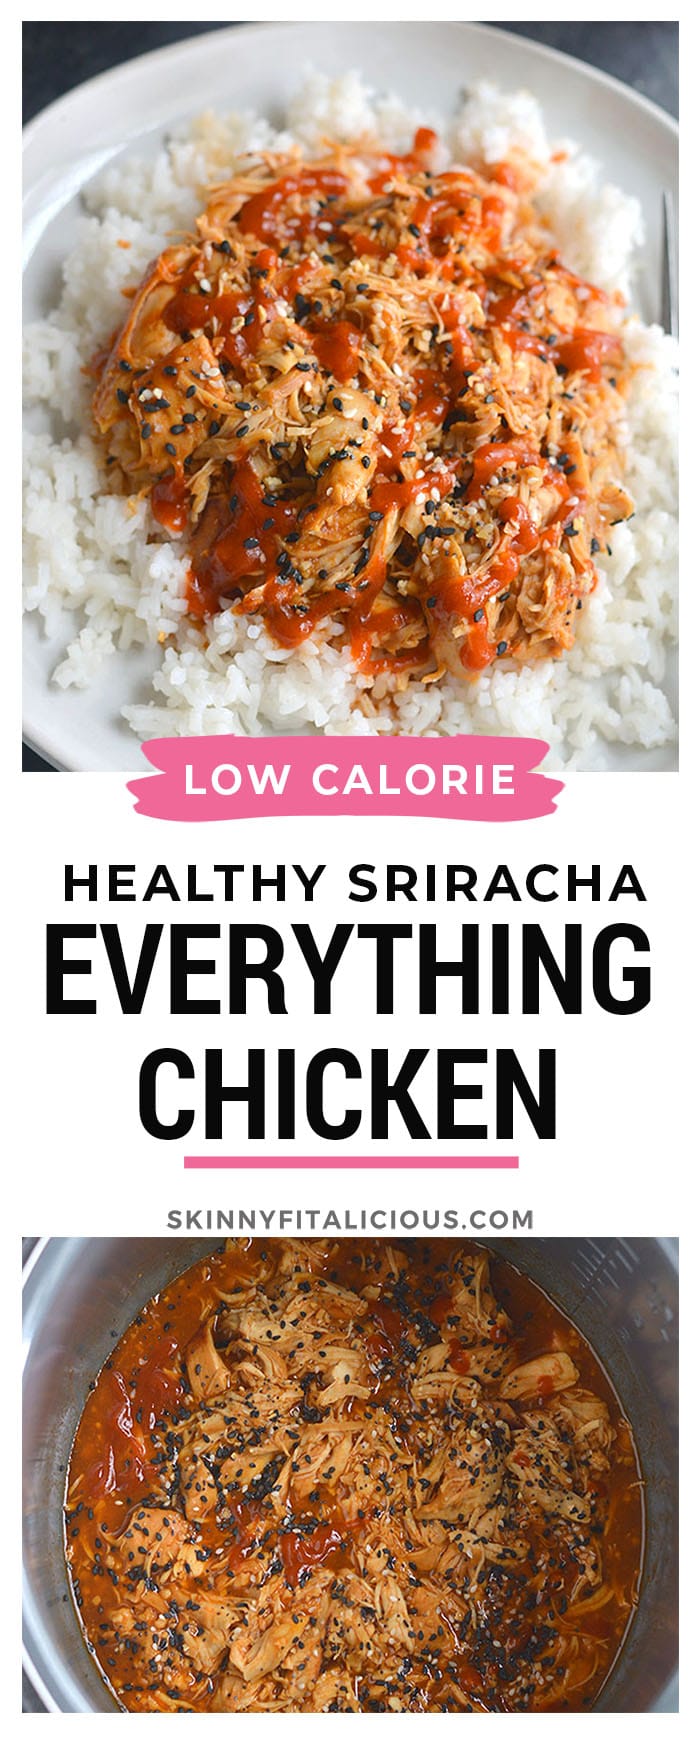 Everything Bagel Sriracha Chicken recipe is packed with flavor and so simple! Made in an Instant Pot in 30 minutes and so versatile. Pair with rice, add to a salad, sandwich or wrap for a quick meal!